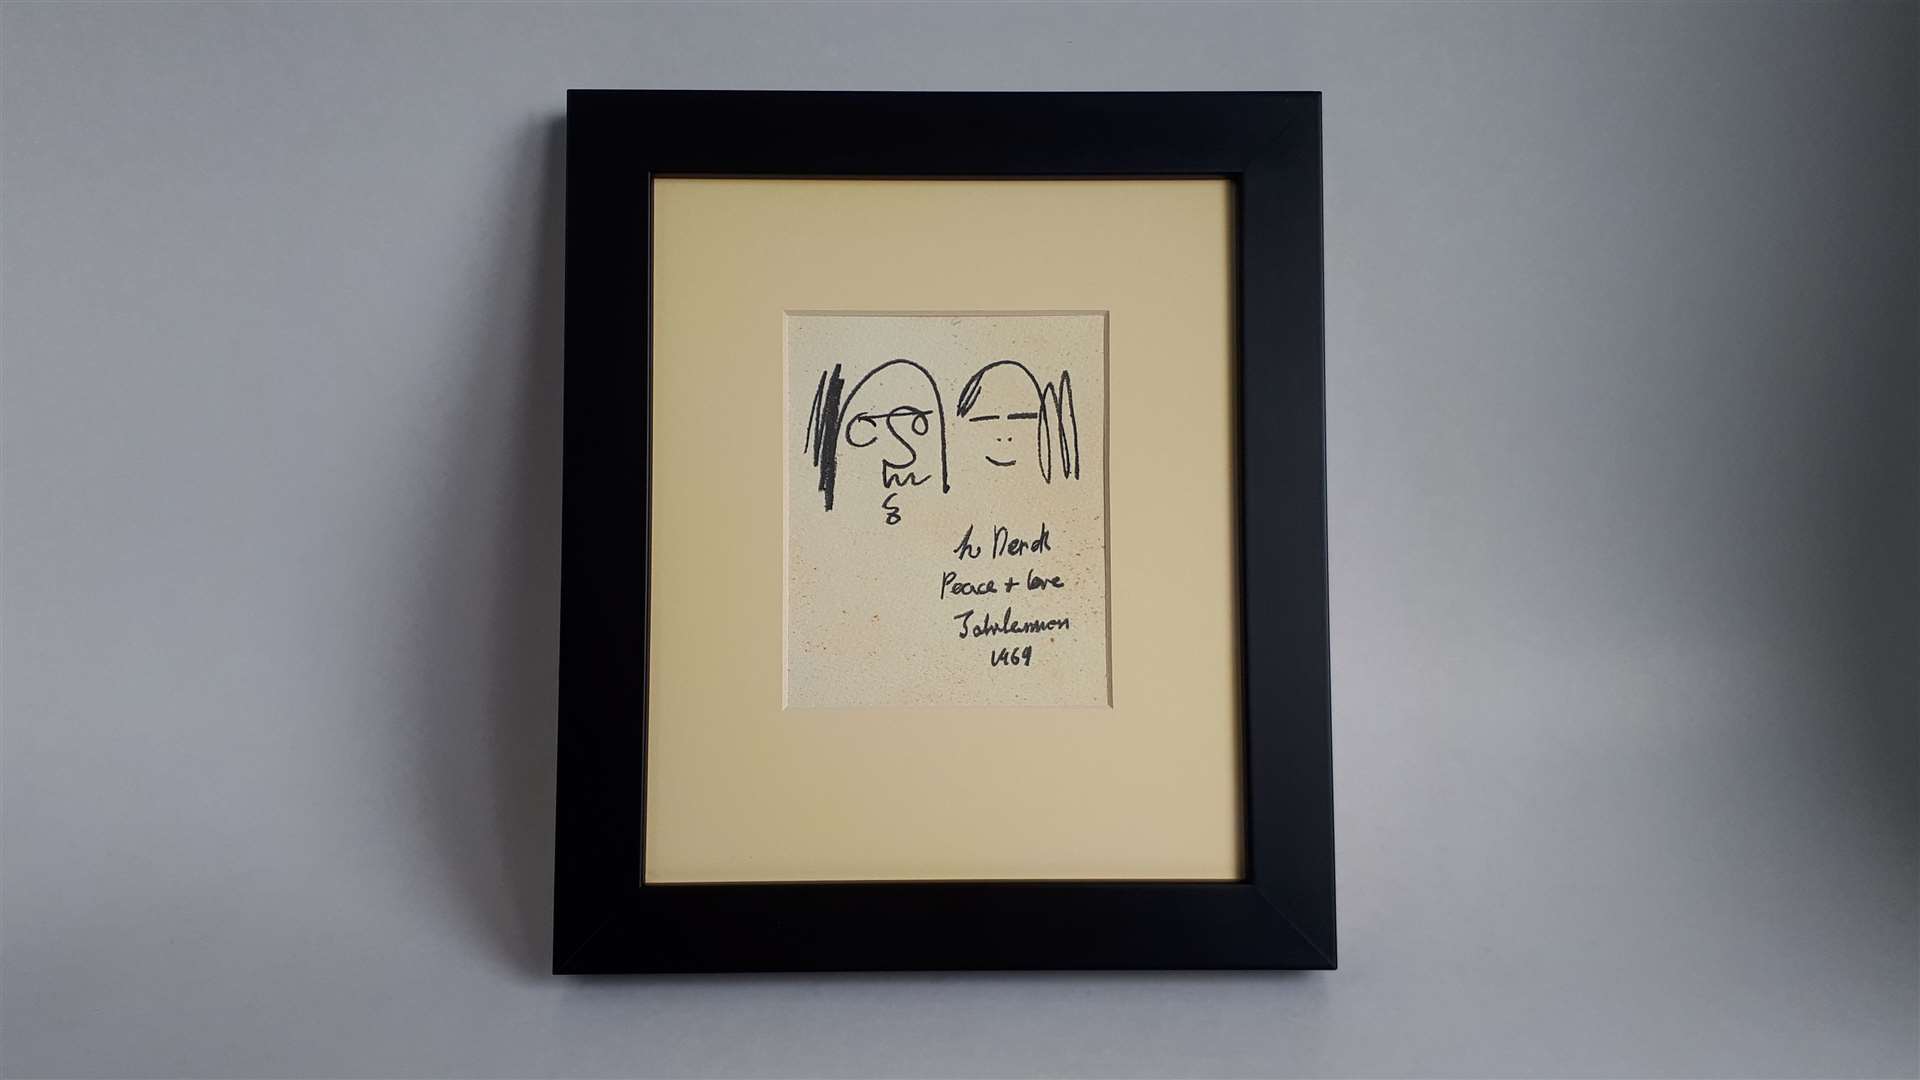 The framed picture is a sketch of Lennon and Yoko Ono in John Lennon’s characteristic caricature style.